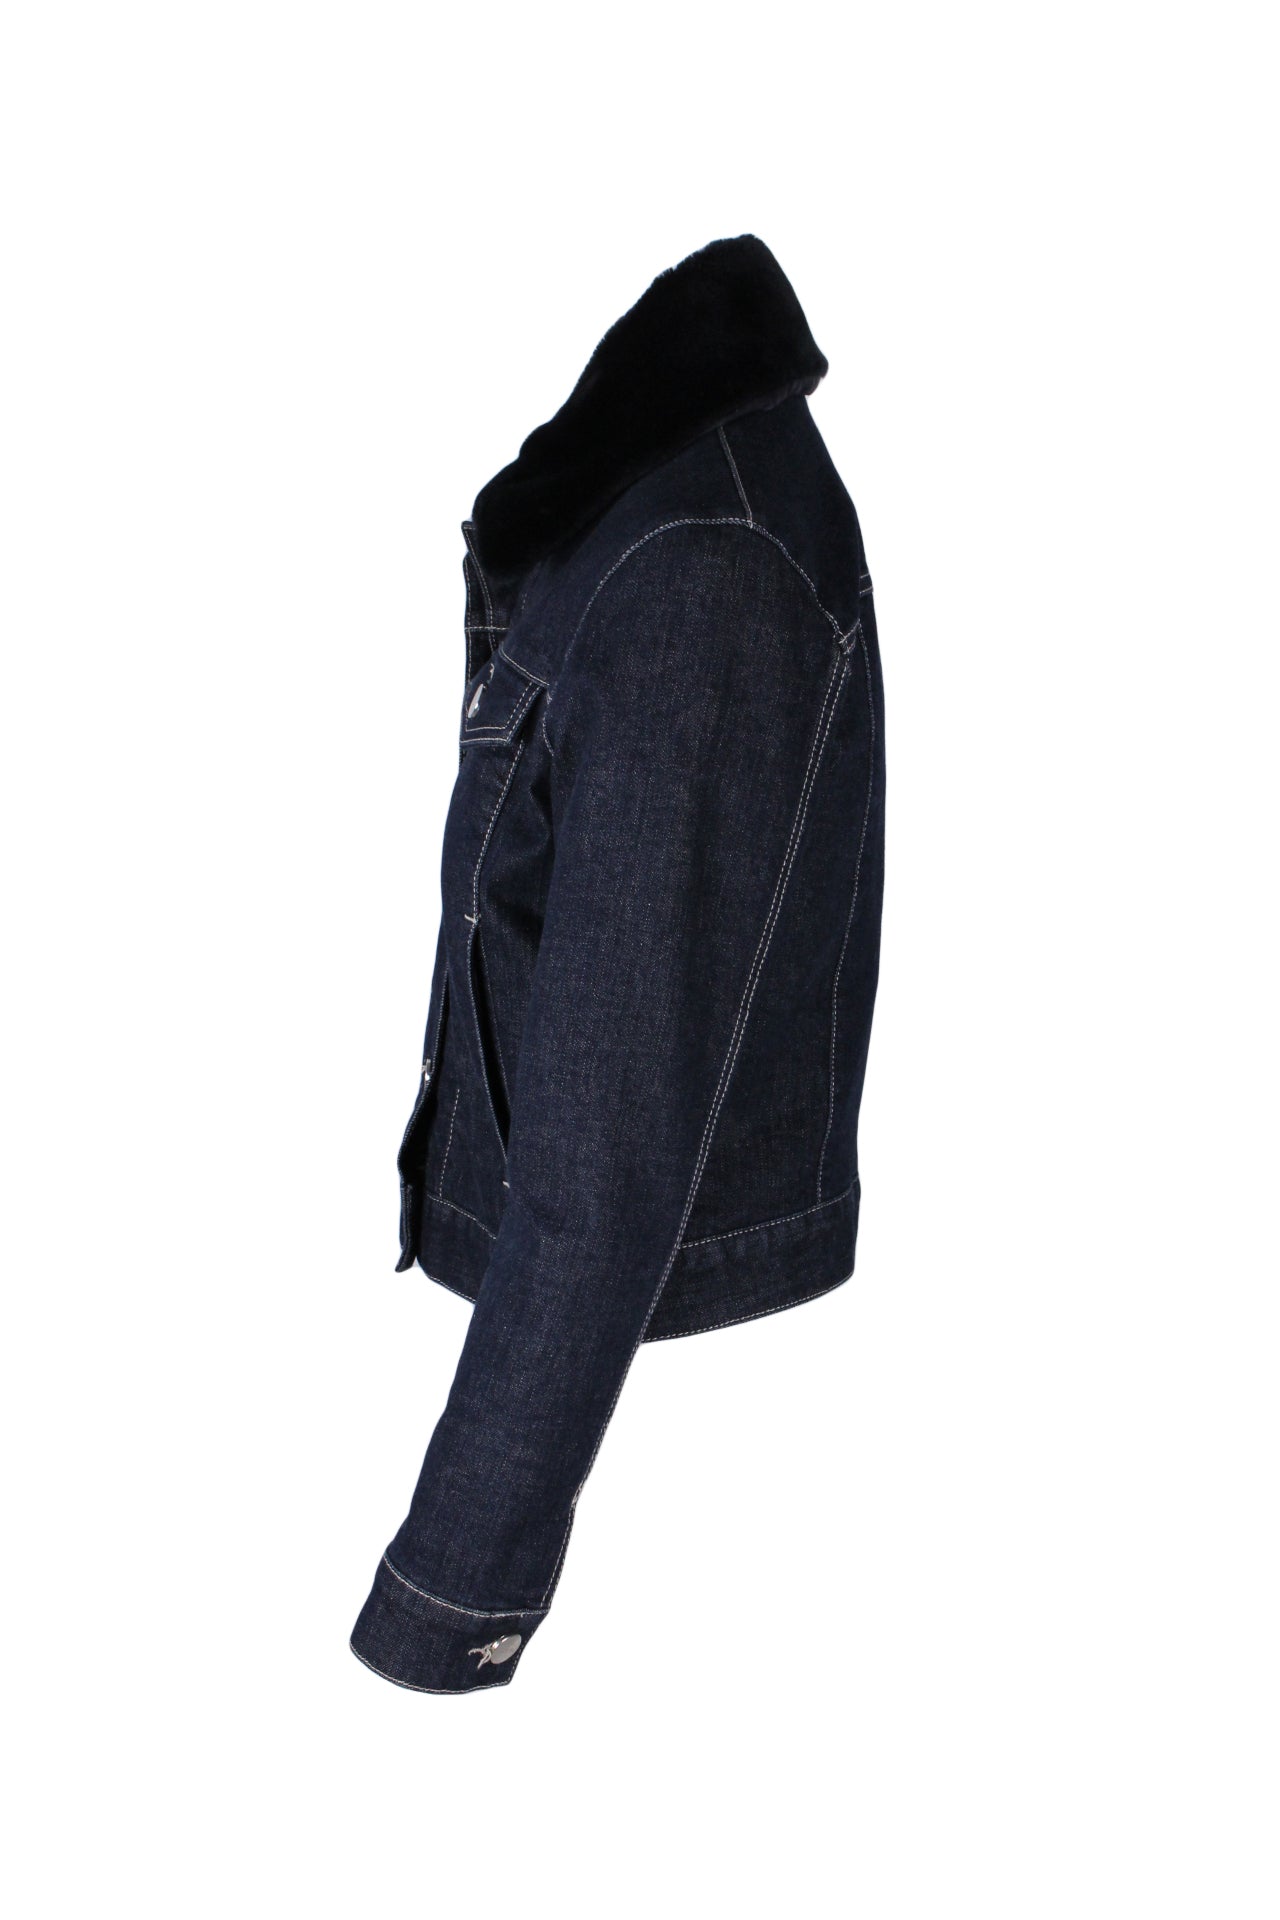 profile of jacket with contrast stitching. 